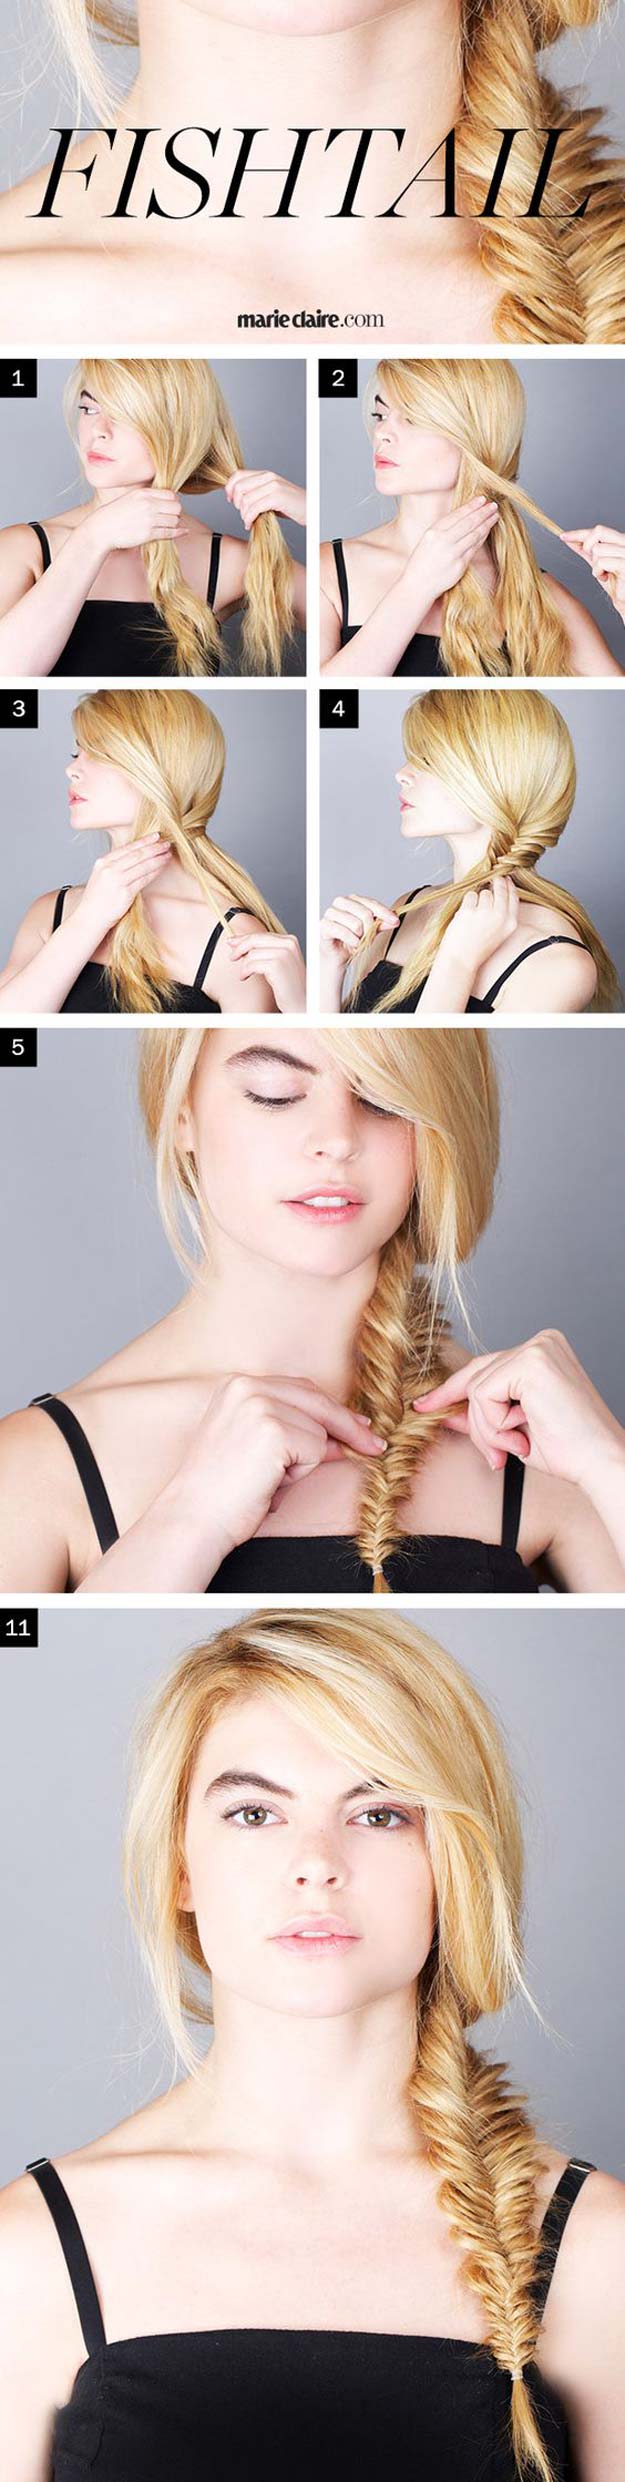 Best Hair Braiding Tutorials - The Perfect Fishtail Braid - Easy Step by Step Tutorials for Braids - How To Braid Fishtail, French Braids, Flower Crown, Side Braids, Cornrows, Updos - Cool Braided Hairstyles for Girls, Teens and Women - School, Day and Evening, Boho, Casual and Formal Looks #hairstyles #braiding #braidingtutorials #diyhair 